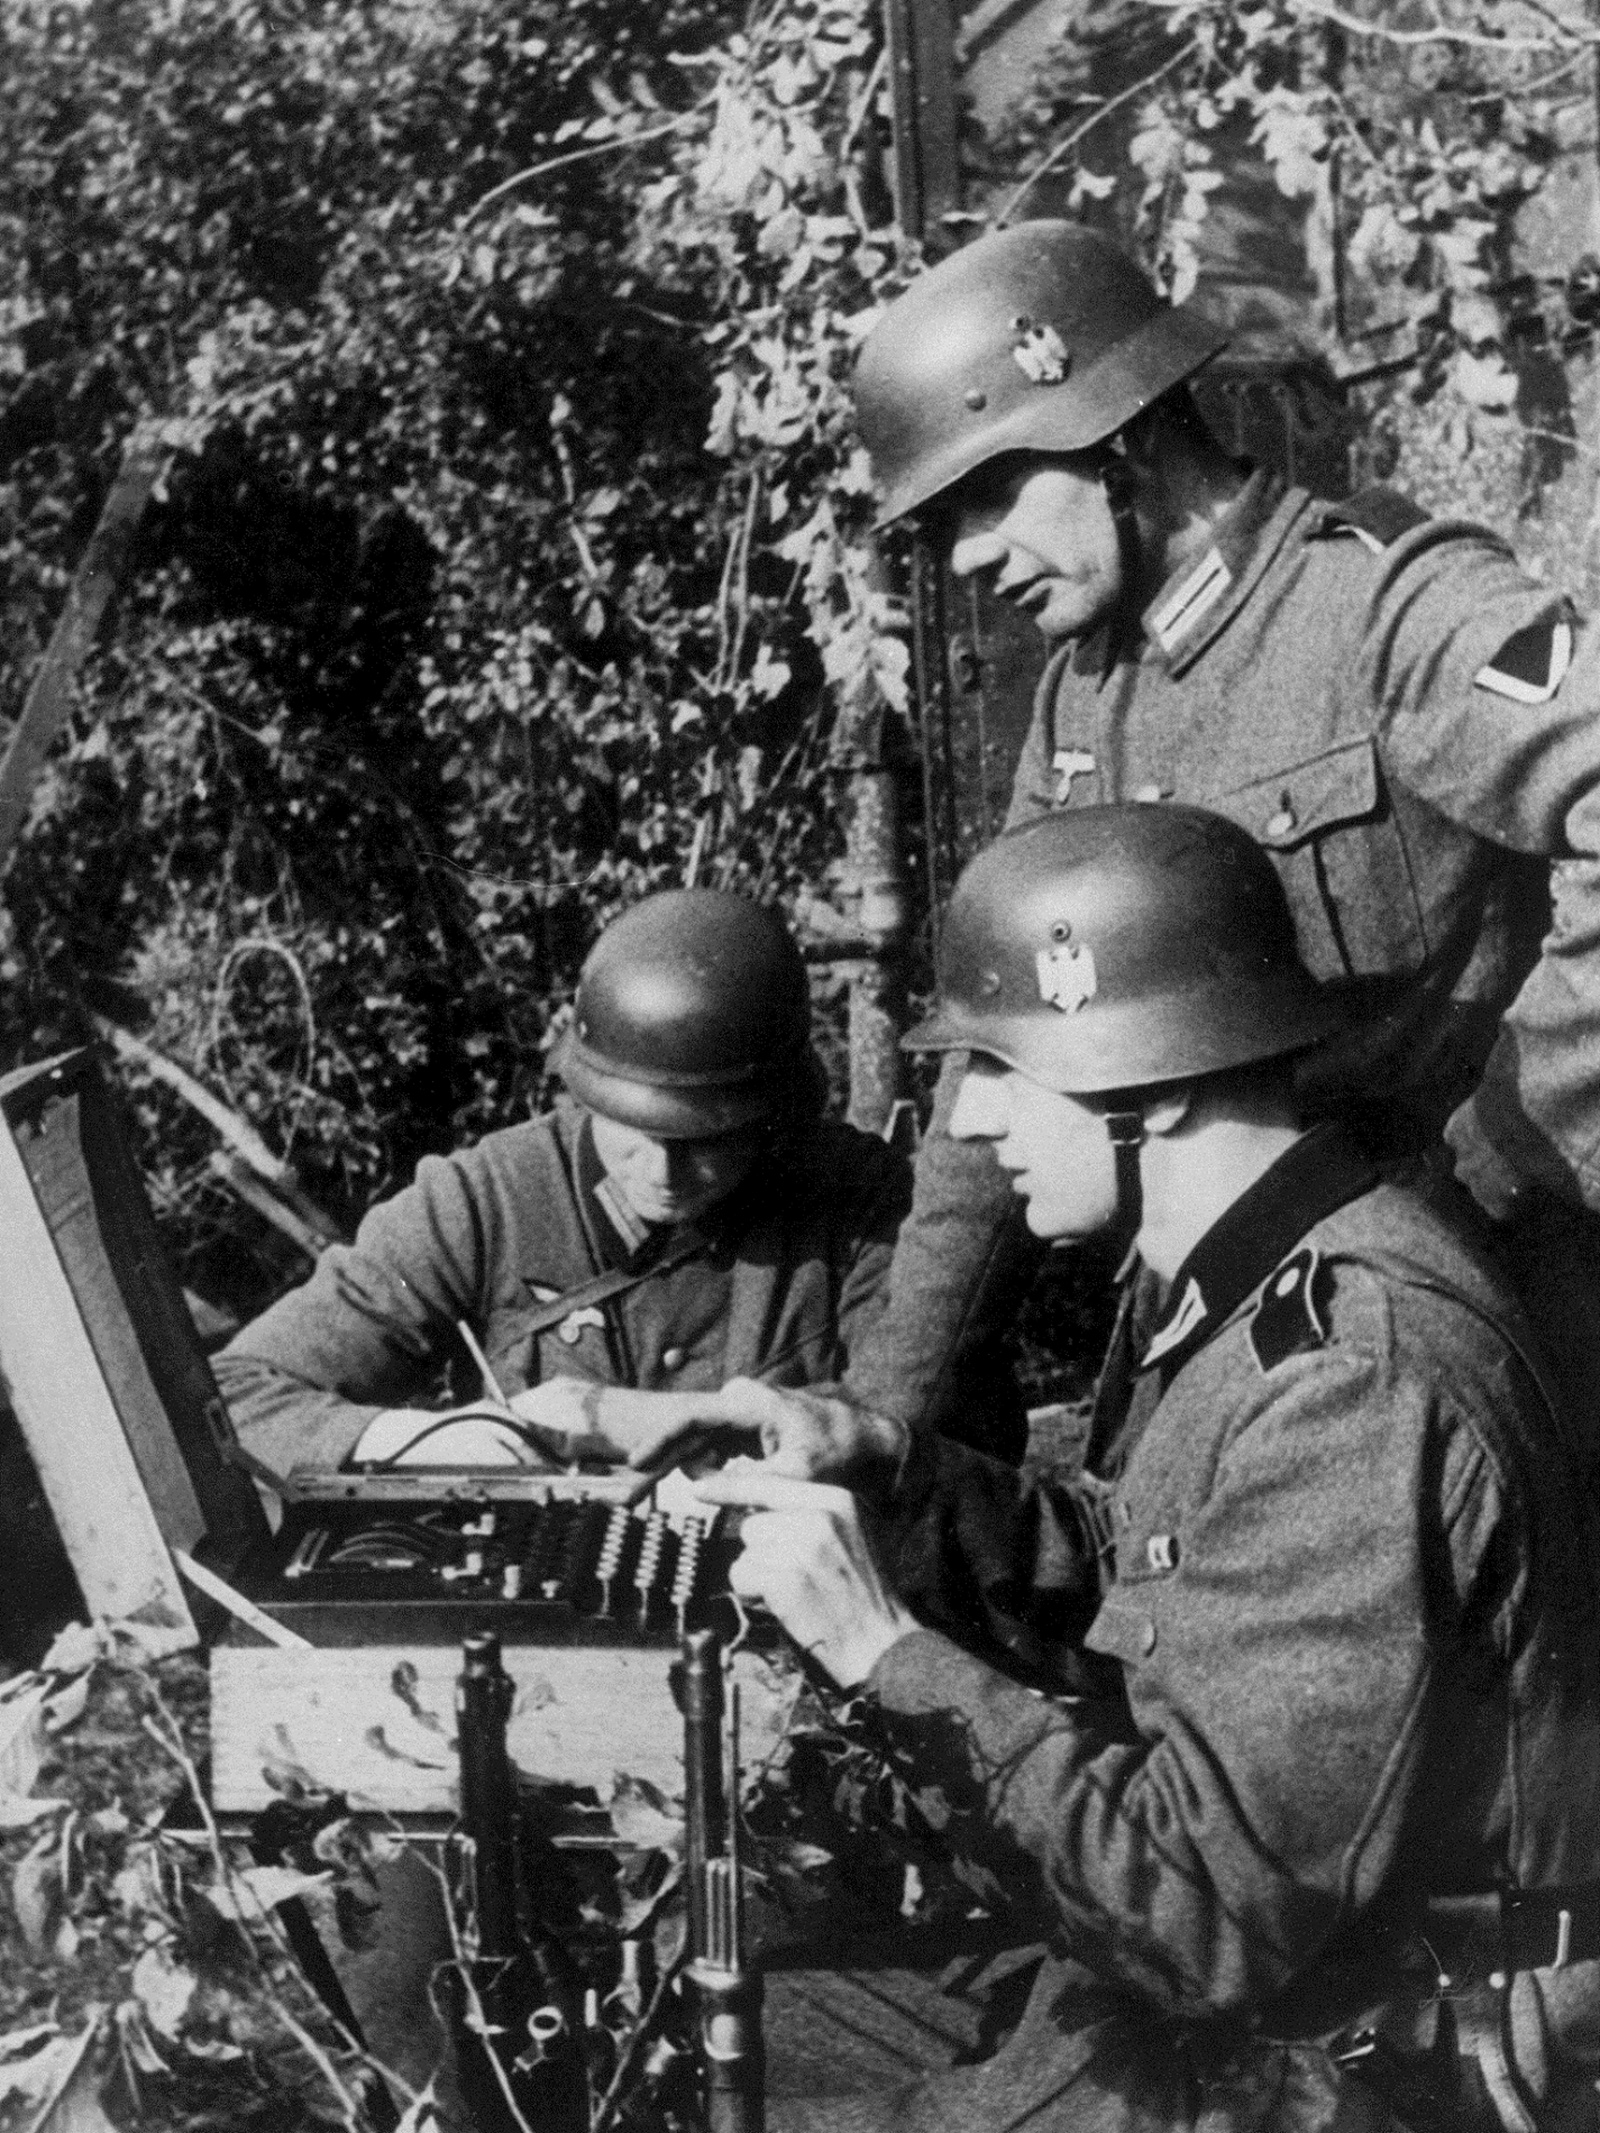 German soldiers in the field enciphering a message on the Enigma code machine, circa 1940